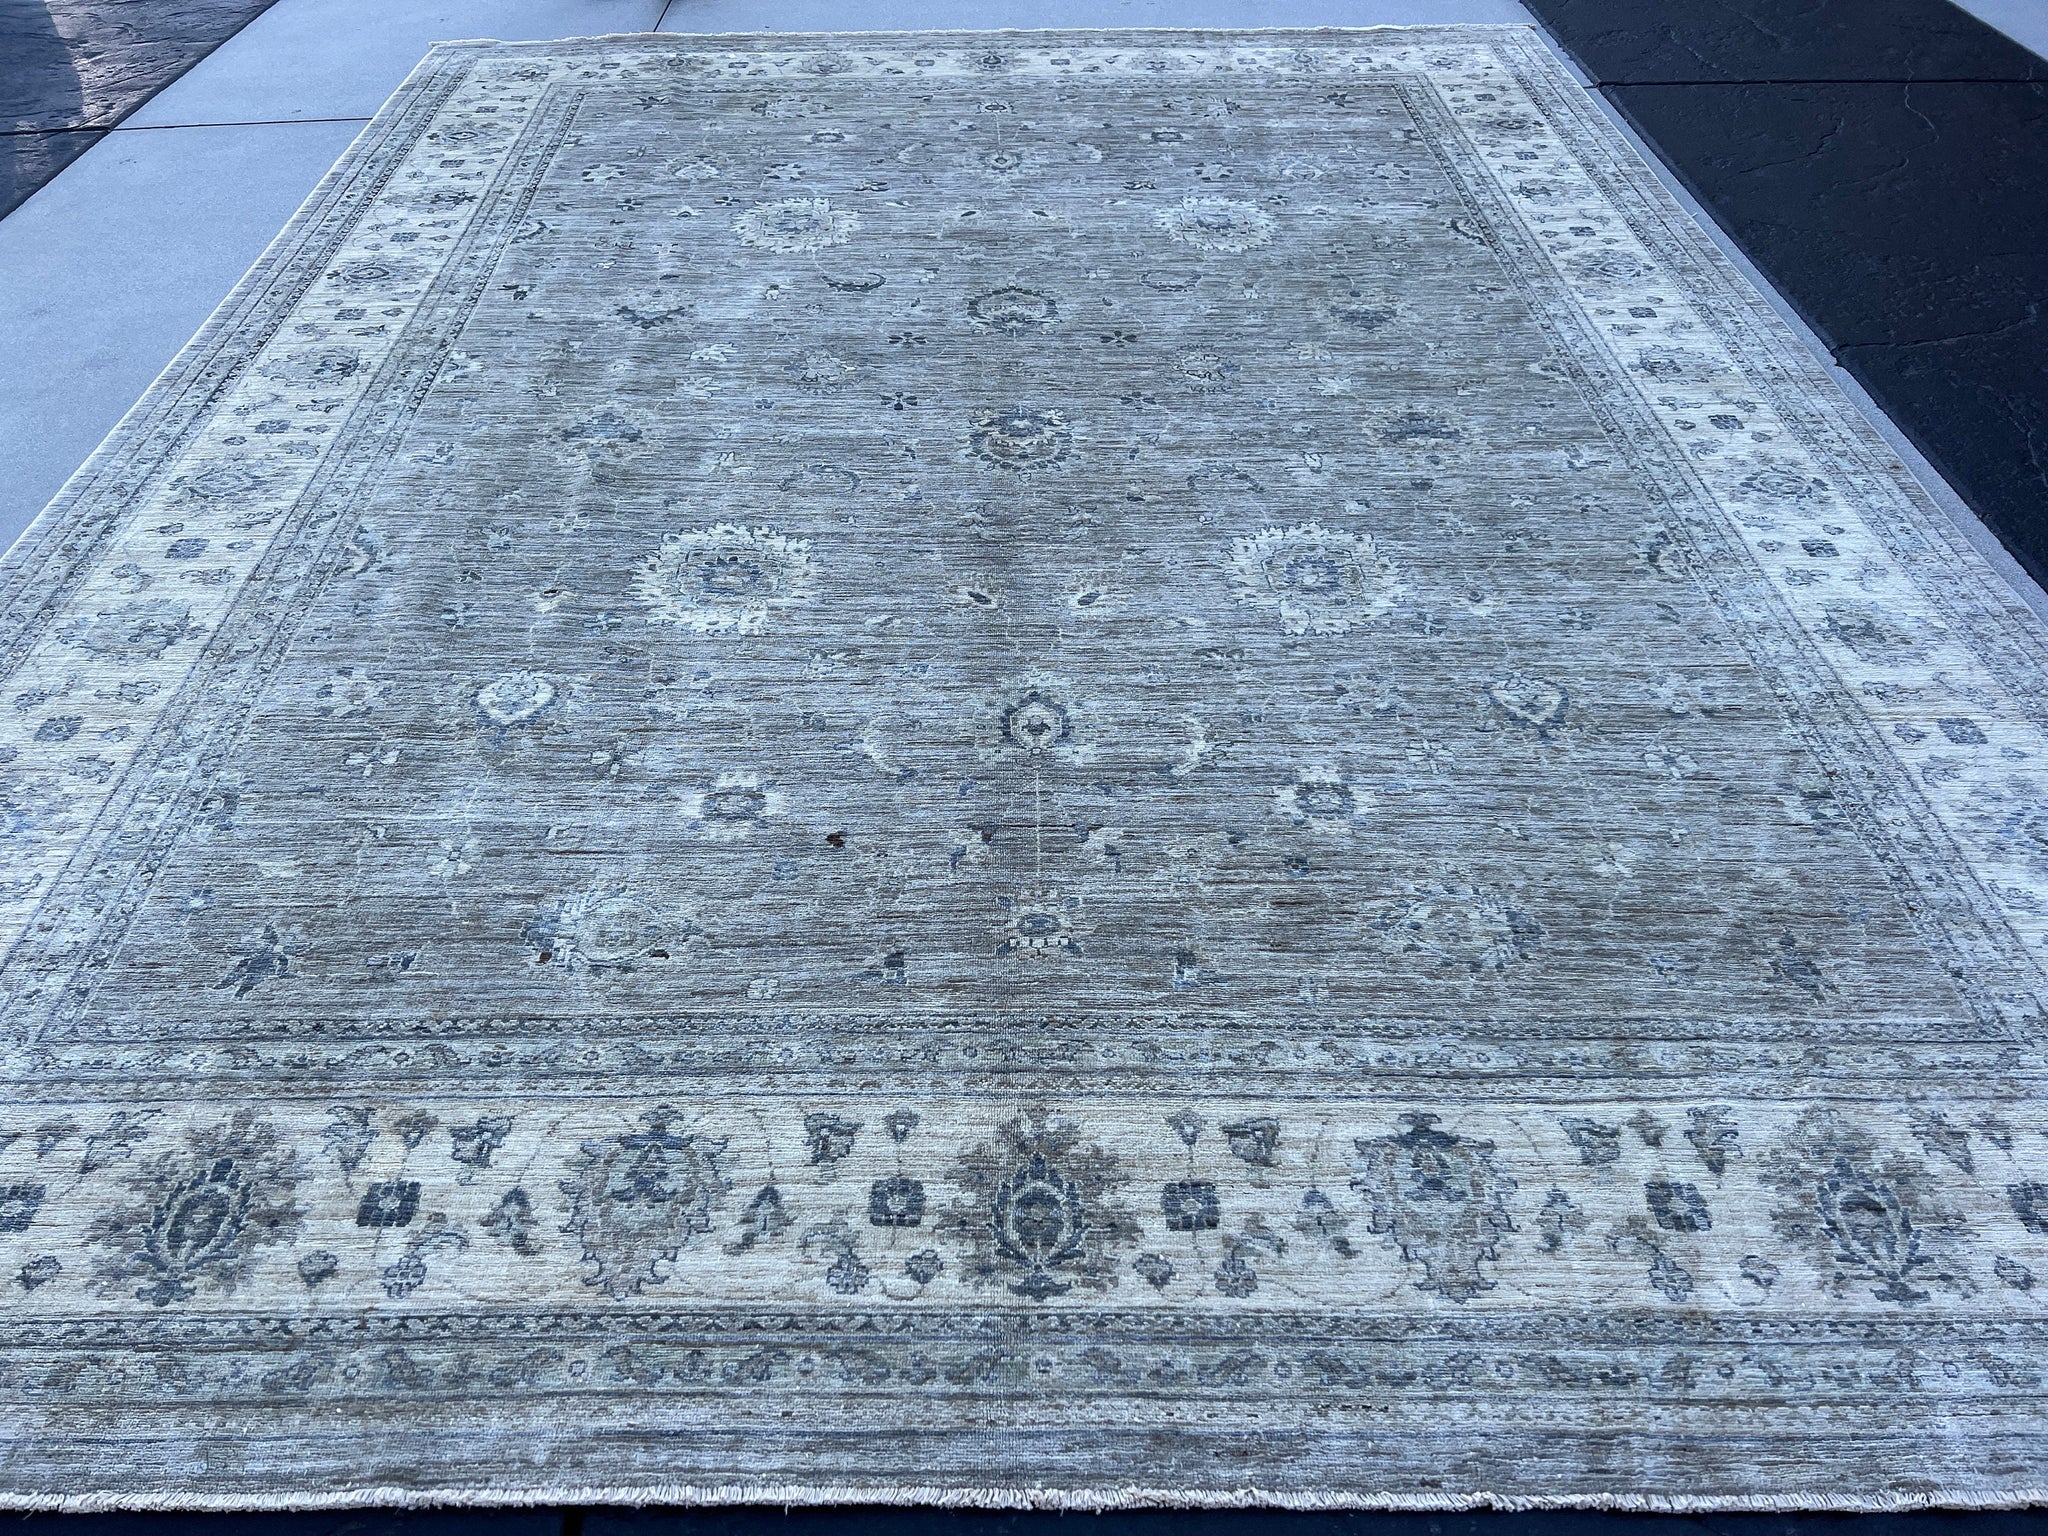 10x13 (305x400) Handmade Afghan Rug | Neutral Muted Grey Gray Cream Beige | Wool Hand Knotted Turkish Oushak Persian Floral Hand Woven